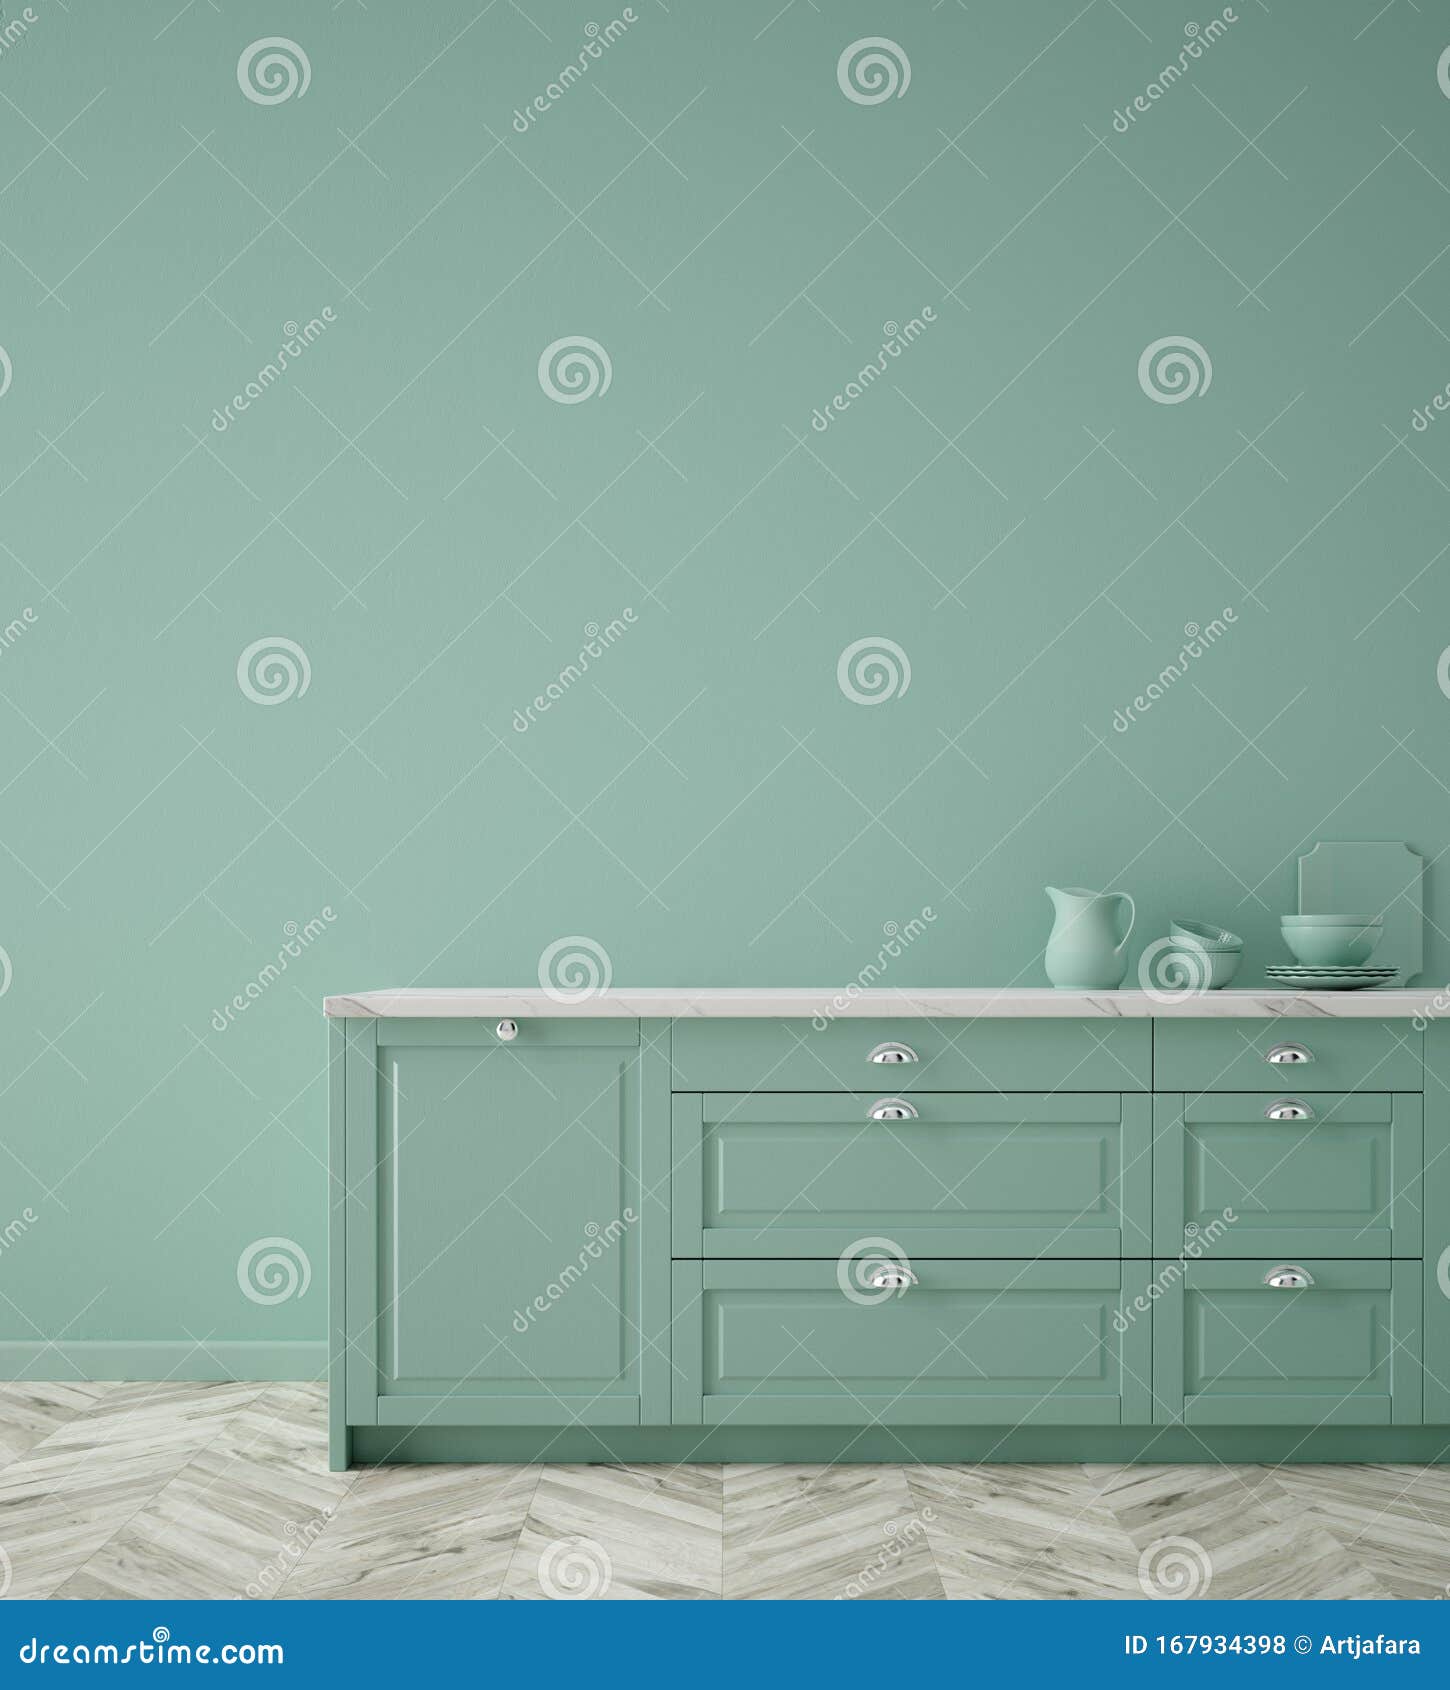 kitchen in neo mint color, wall poster mock up